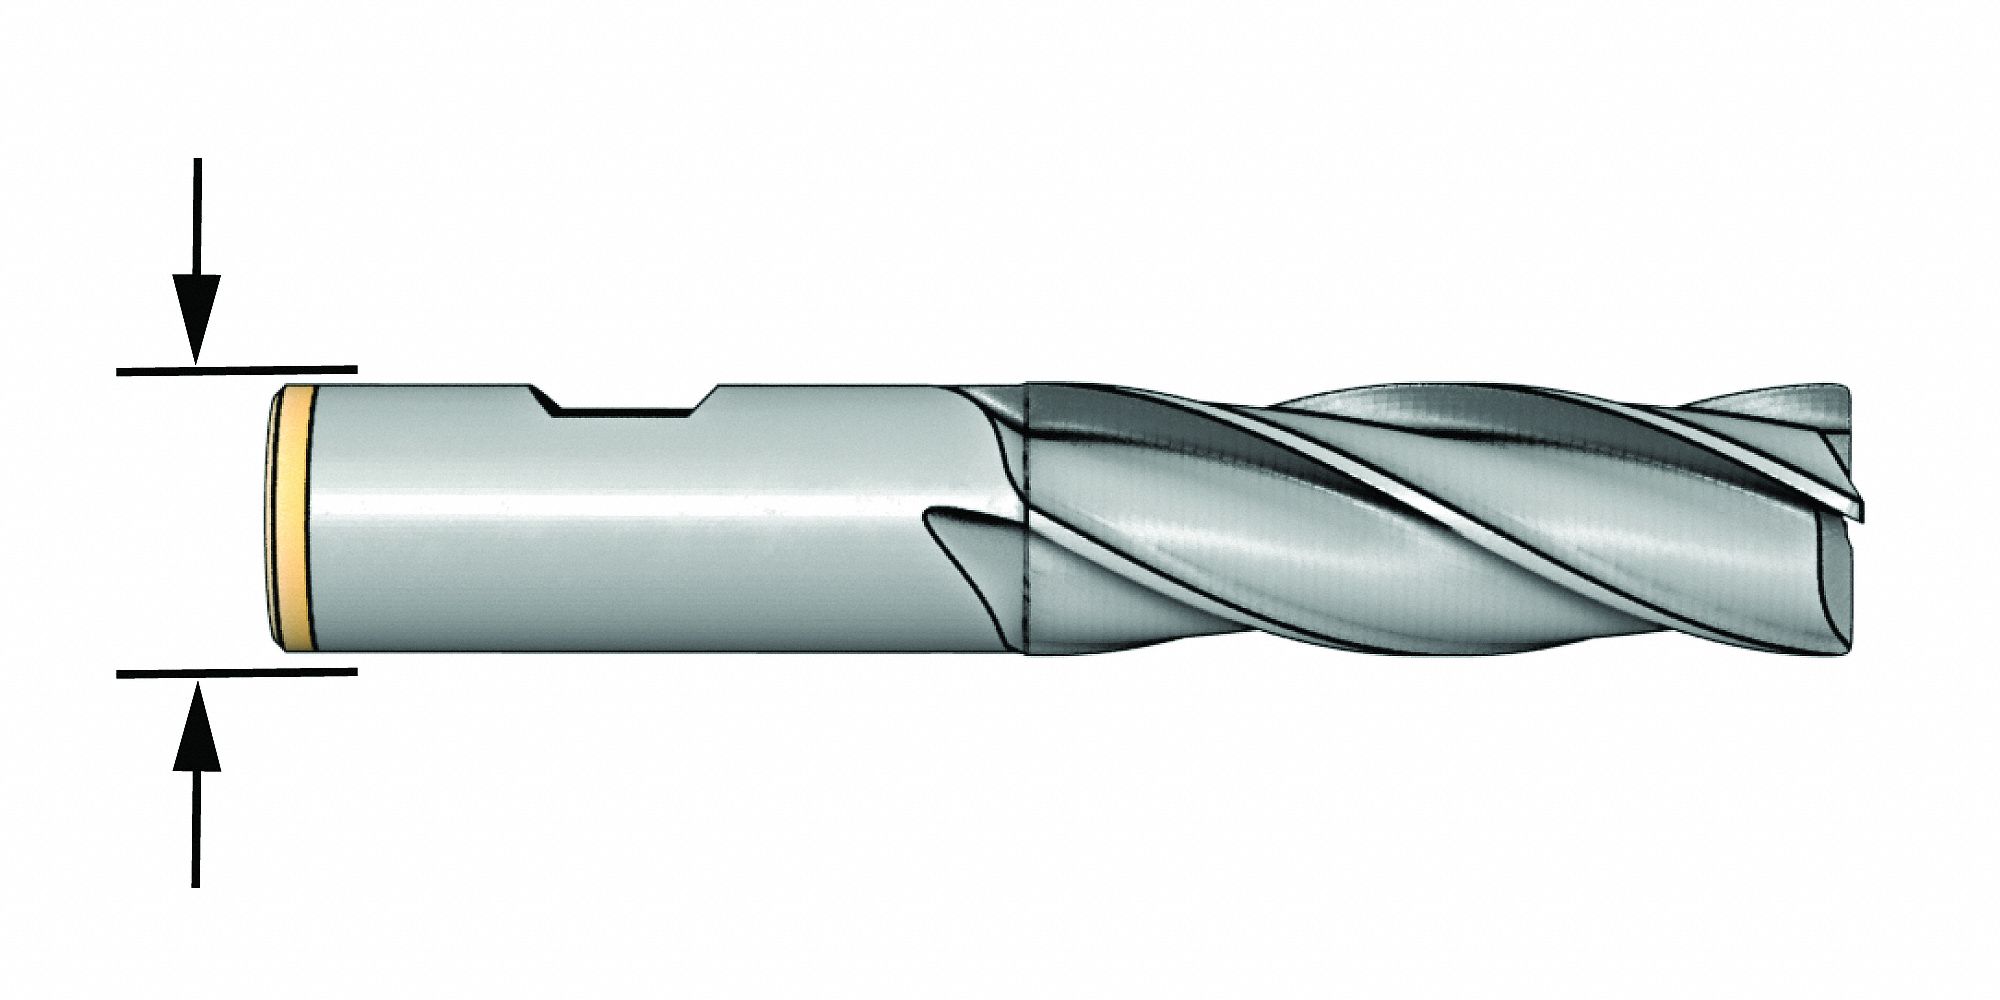 BMSM-010-4 1.00mm Milling Dia Number of Flutes: 4 Micro 100 Ball End Mill BMSM Uncoated 1.50mm Length of Cut 